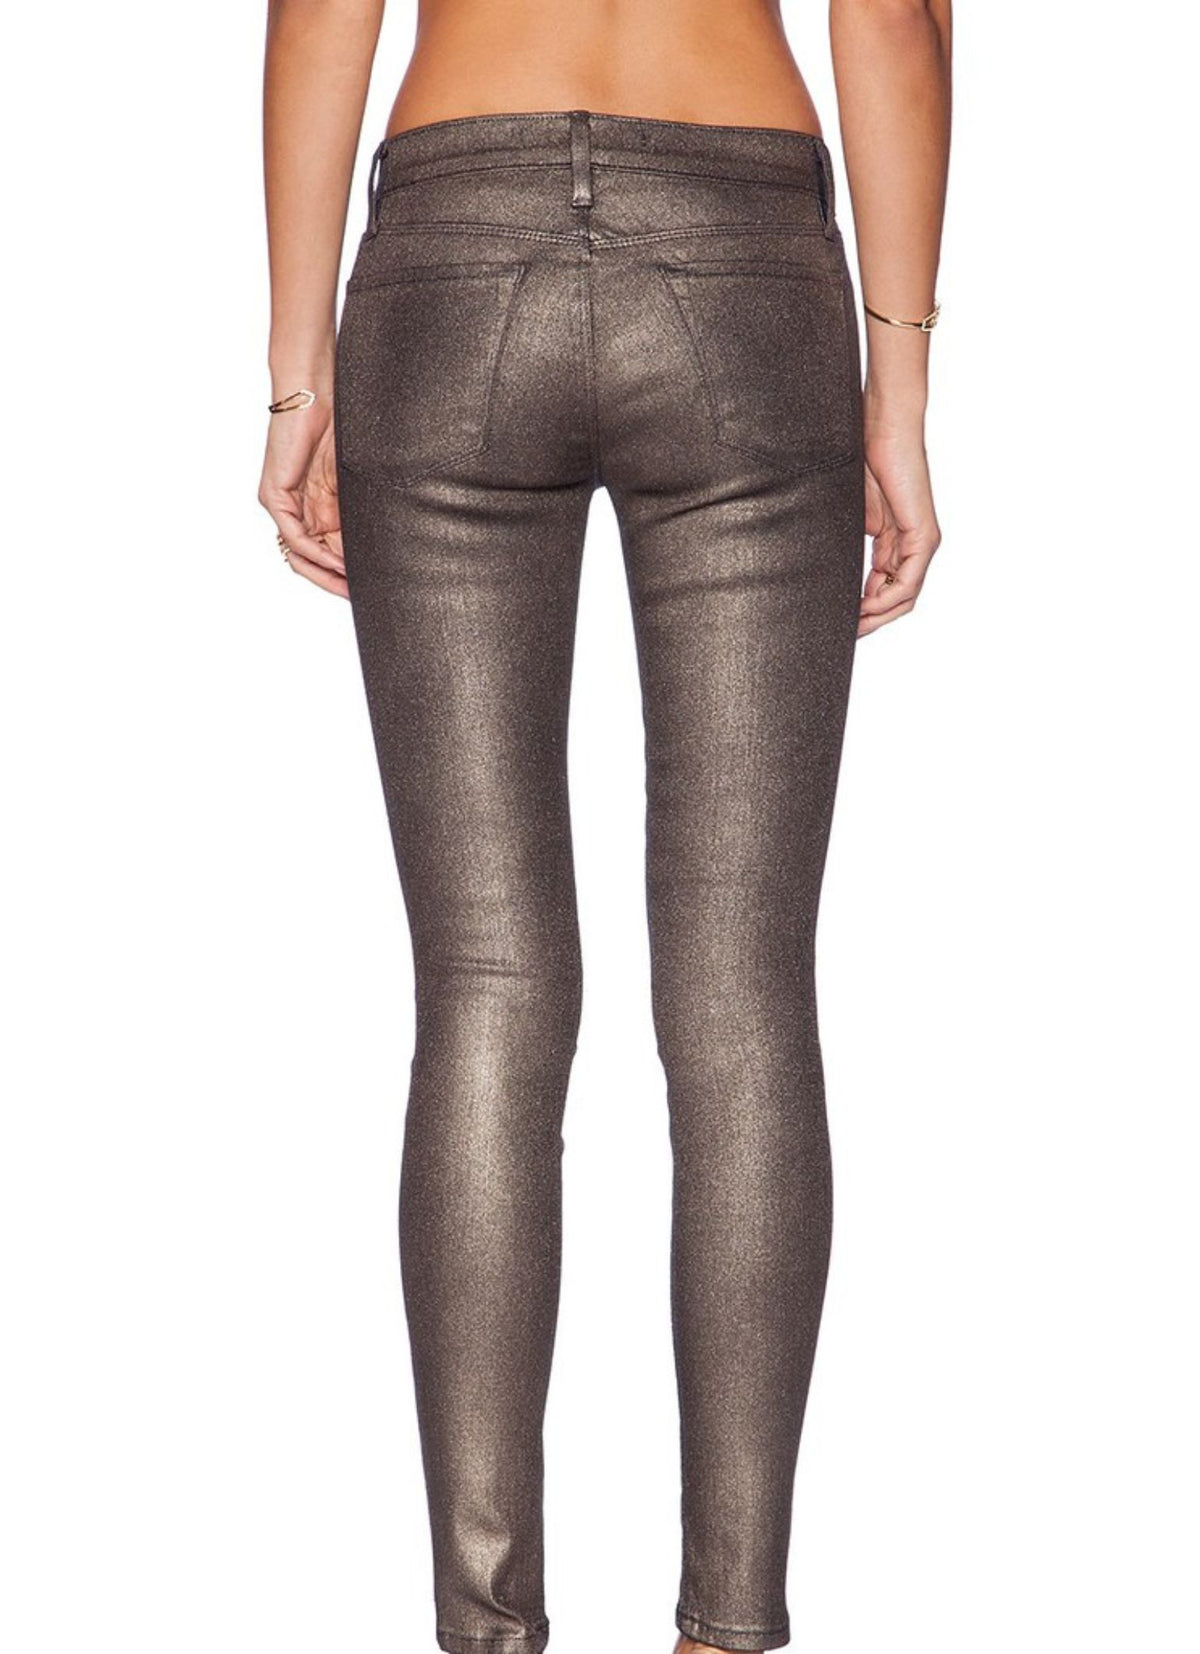 J Brand Super Skinny Gold Dust Jeans - Second Chance